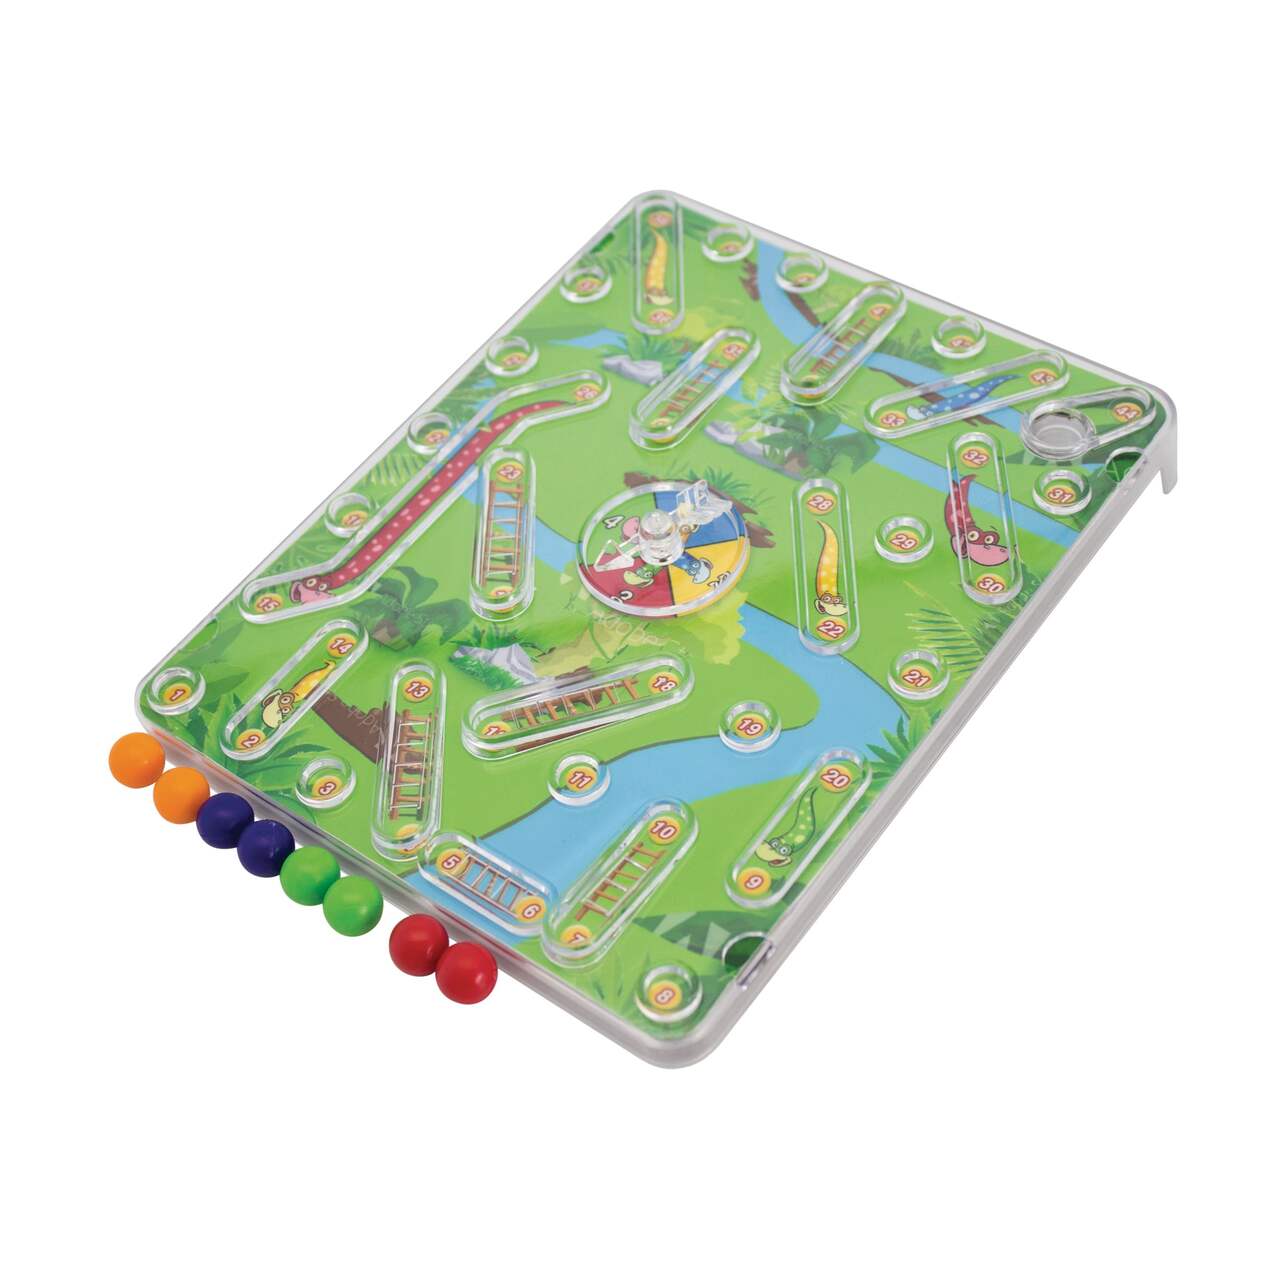 Cardinal Games Gone Fishin' Hand-Eye Coordination Game Set For Kids, Ages  4+